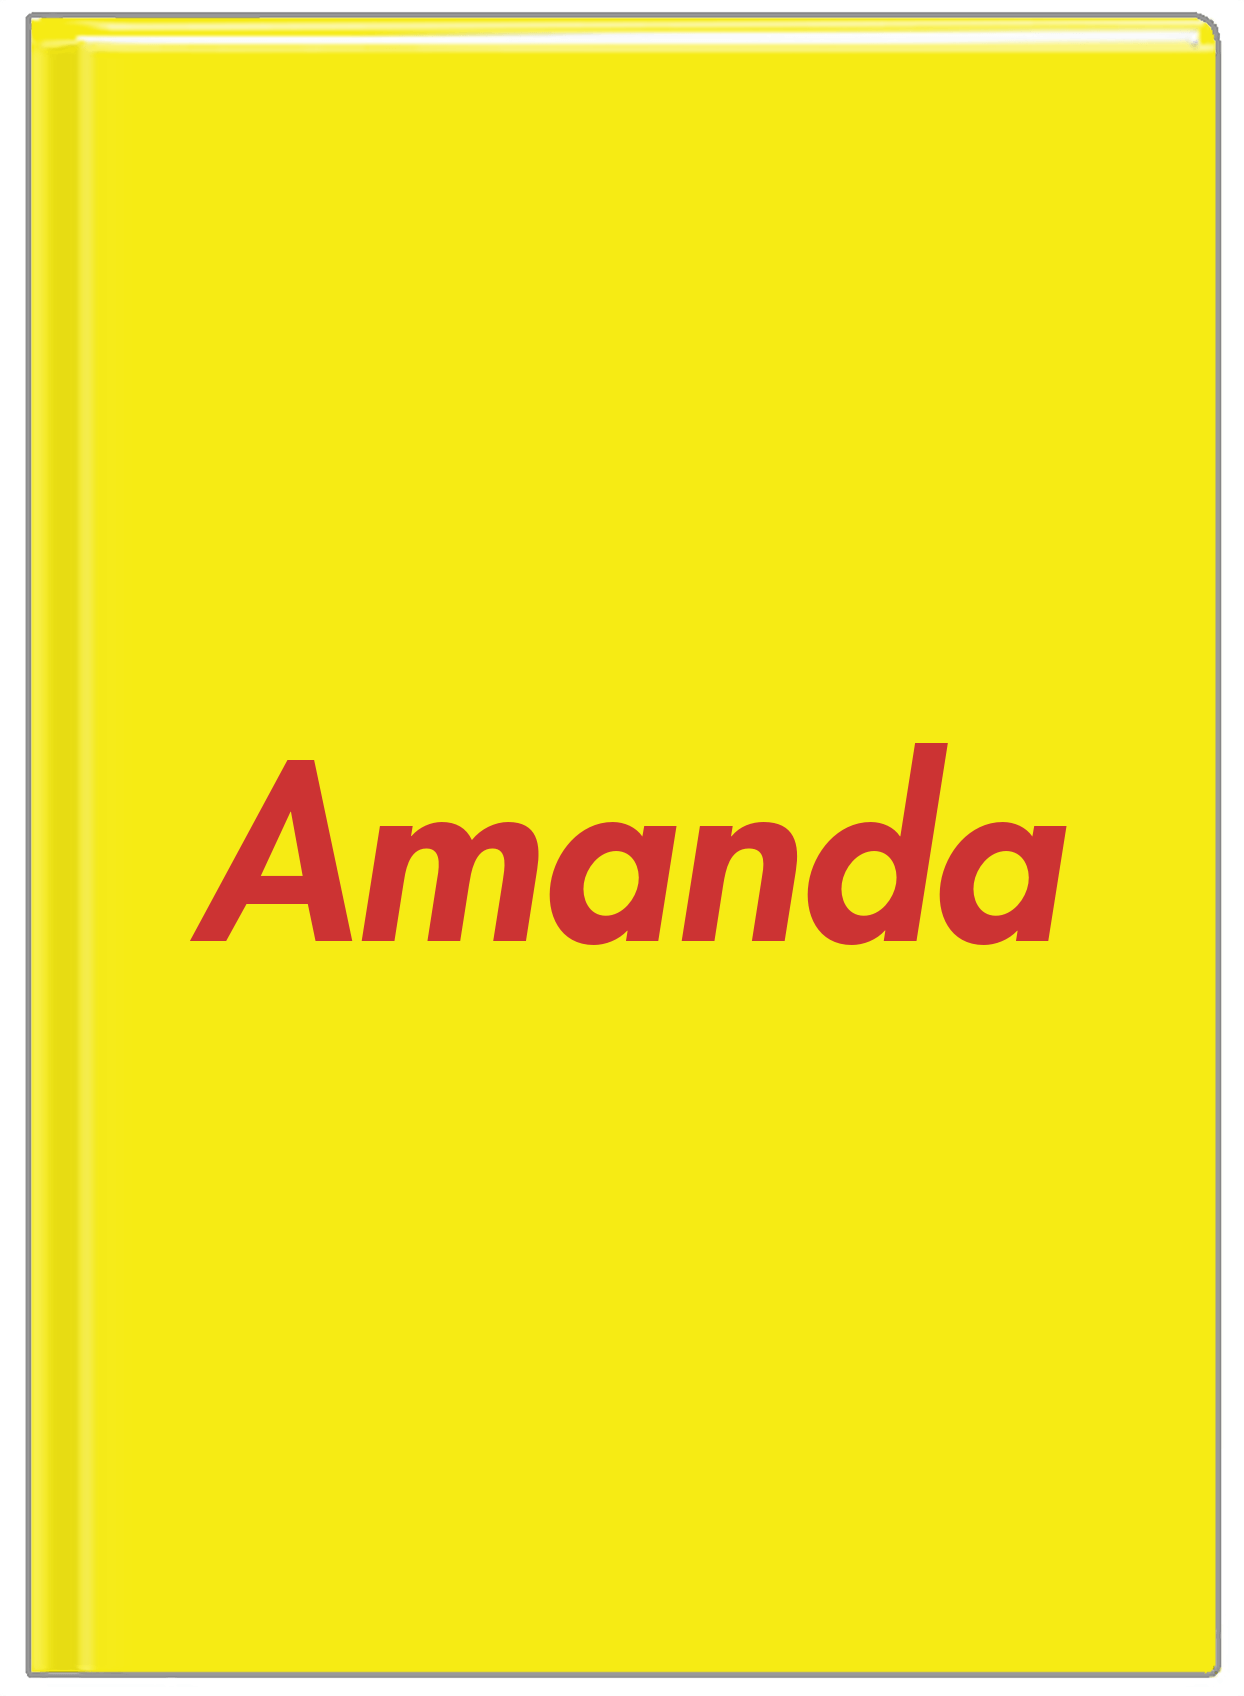 Personalized Solid Color Journal - Yellow Background - Front View